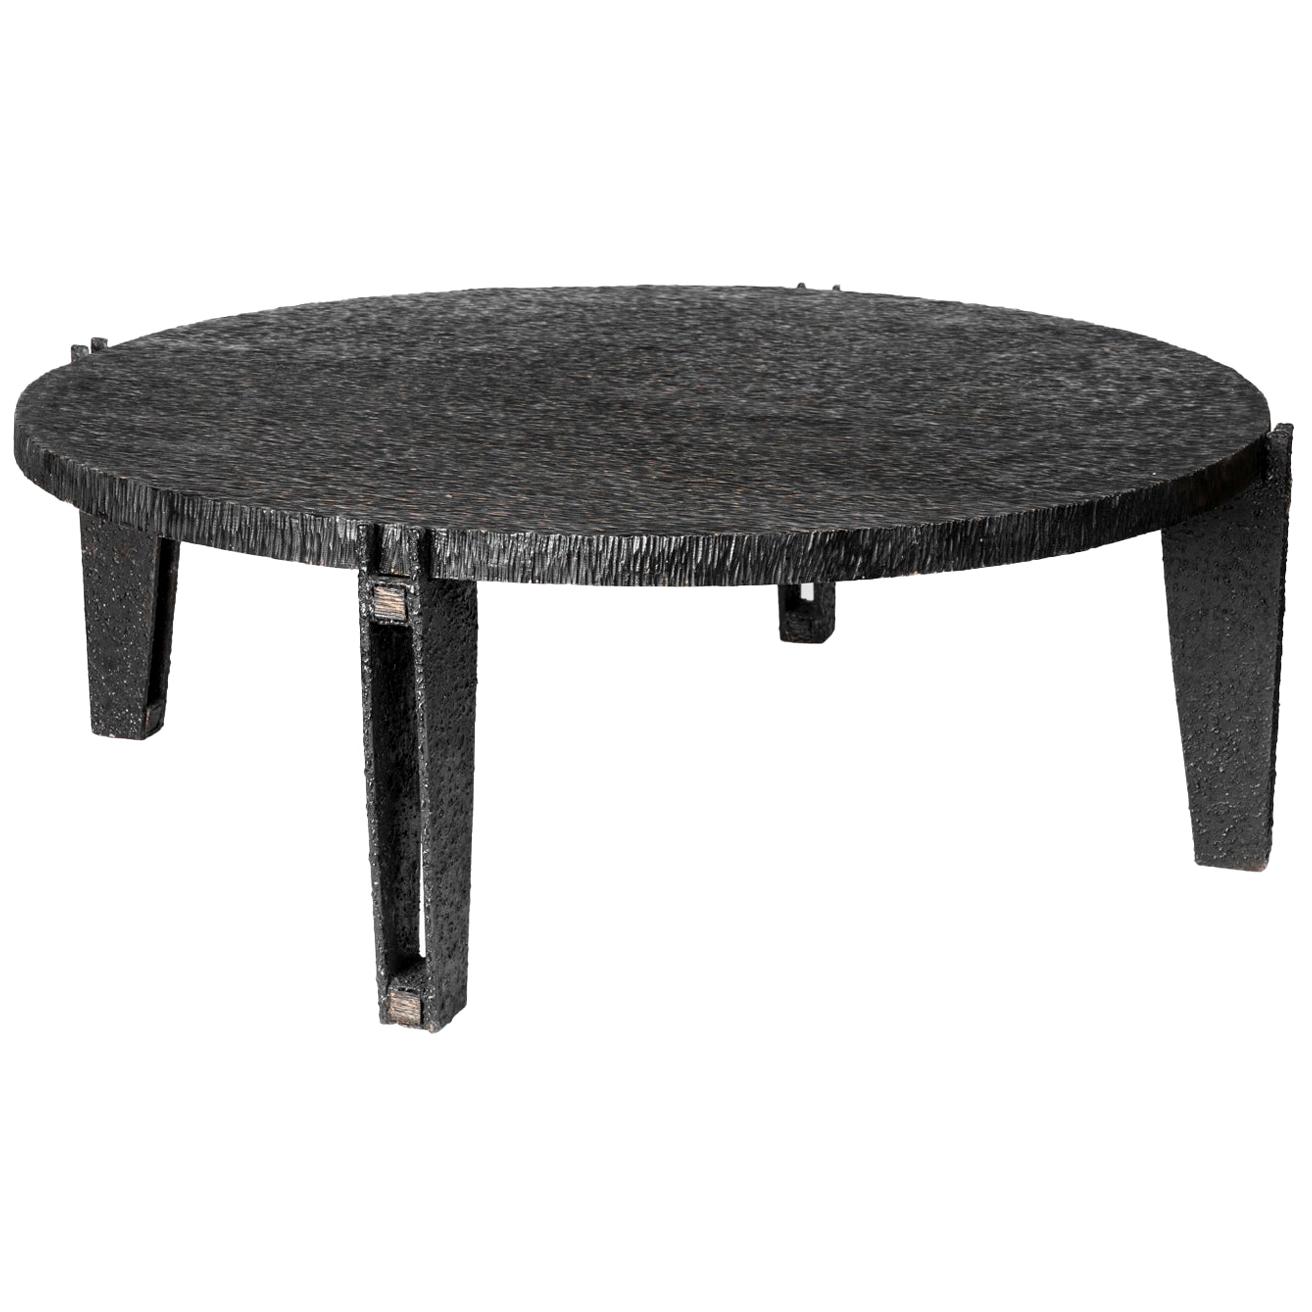 Blackened Gouged Wood Coffee Table, Contemporary Work